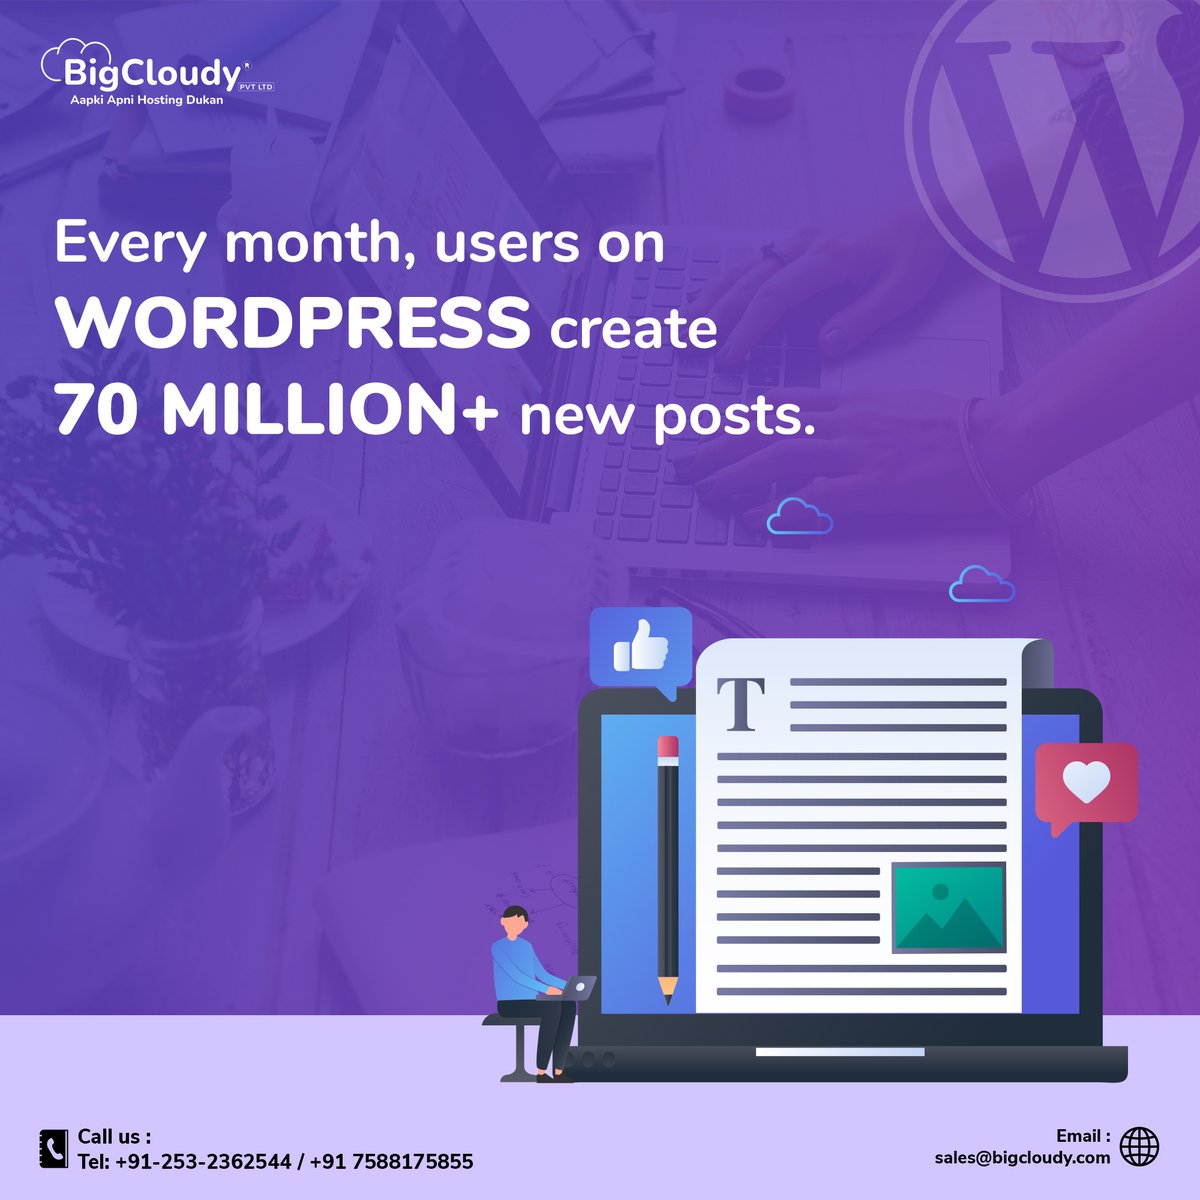 It's #WordPressWednesday! 🌟 Did you know 🤔 that every month, users 👨🏻‍💻  on WordPress 🌐 create a staggering 70 million new posts?  📄   

Follow us 🙋🏻‍♂️ for more WordPress facts and tips every week! ✅

#WordPress #wordpresswebsite #BigCloudy #facts #webhosting